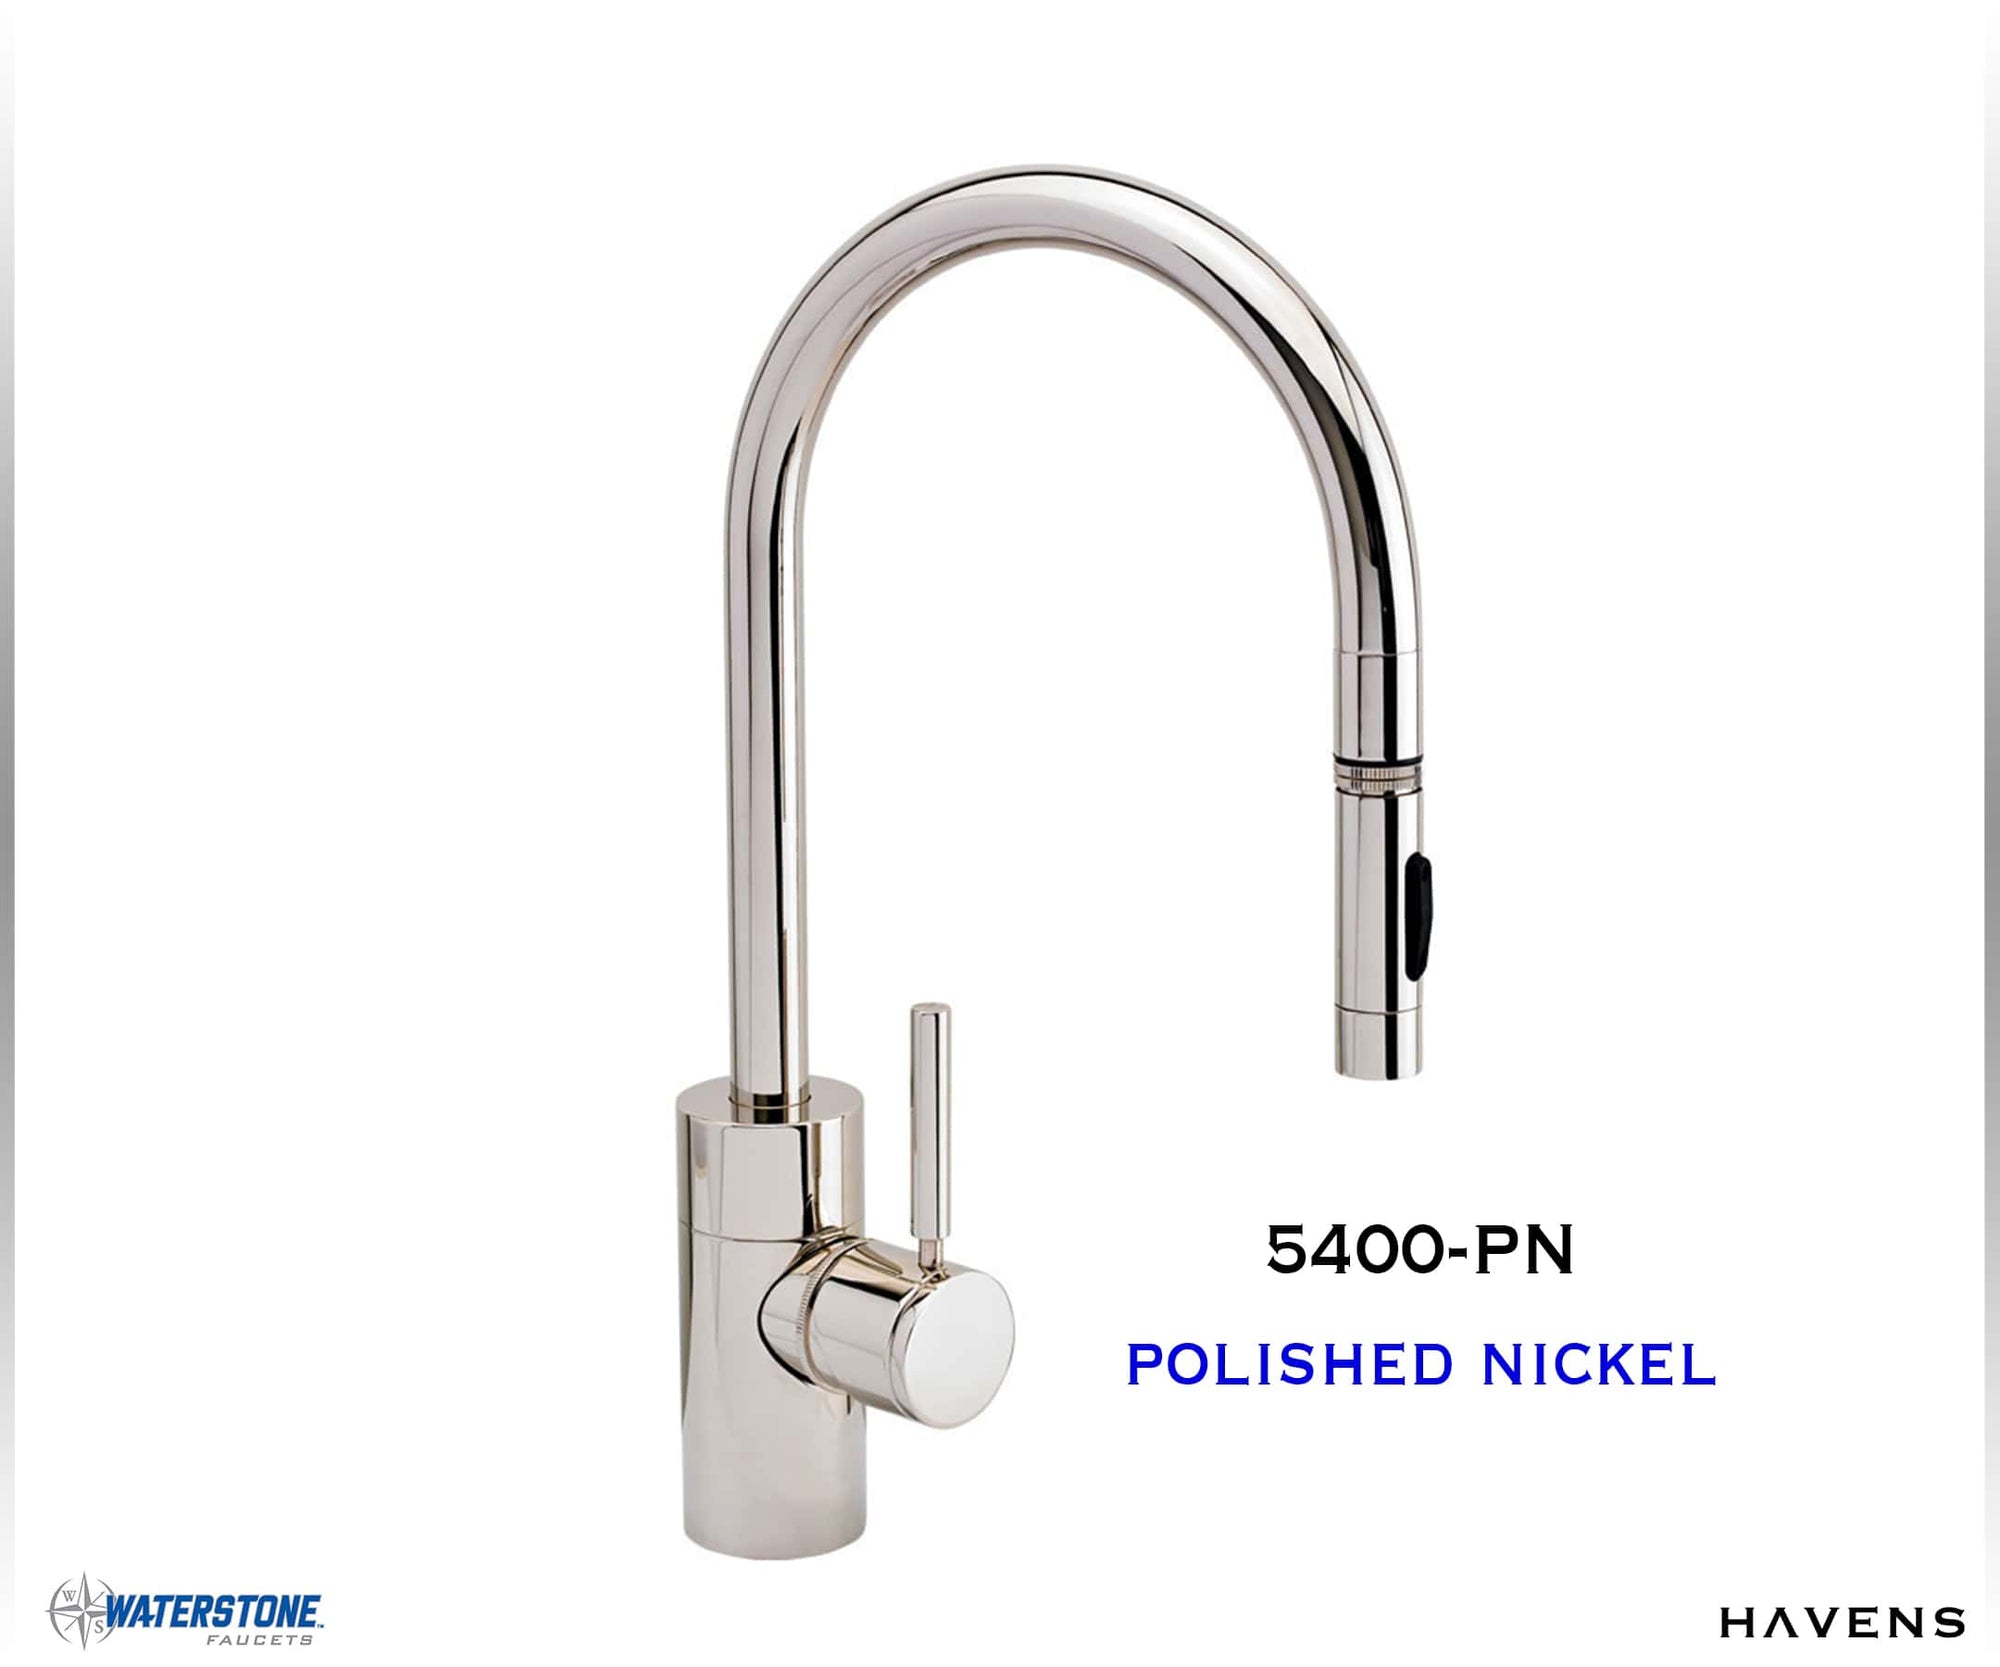 Waterstone Contemporary PLP Pulldown Faucet - 5400